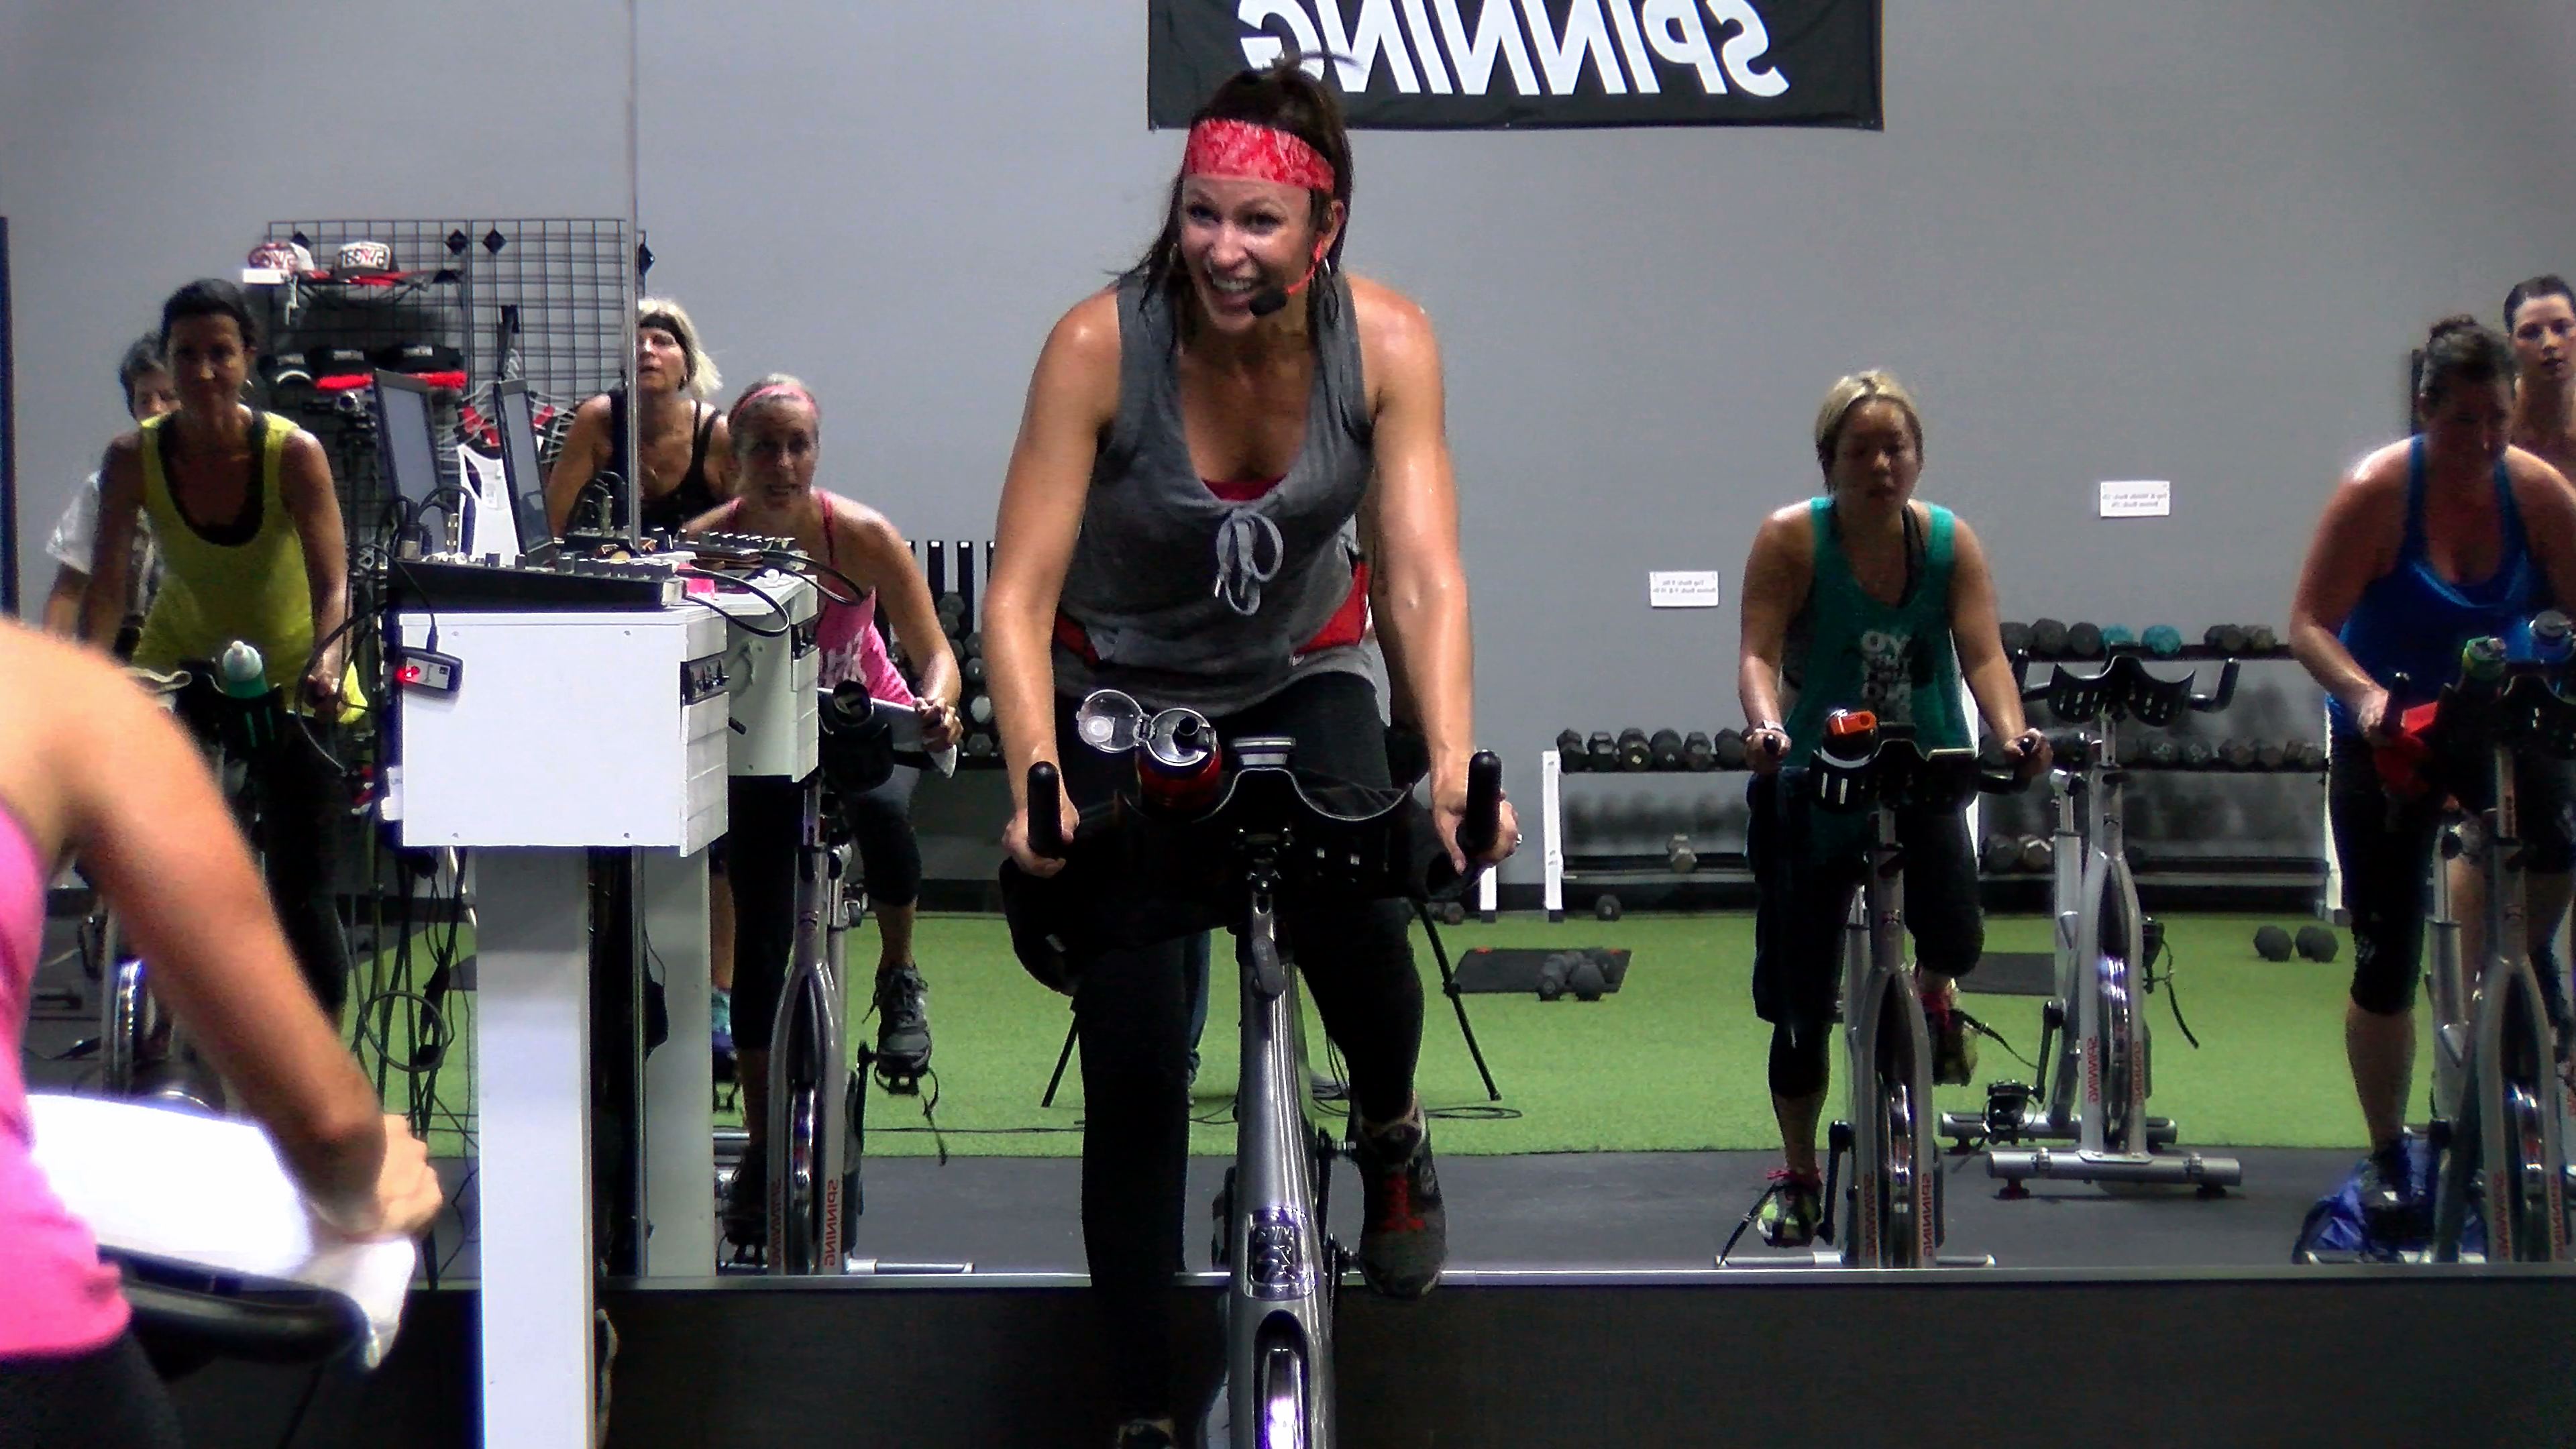 Amazing 30 Minute Spin Class! - "HIP HOP CYCLE"